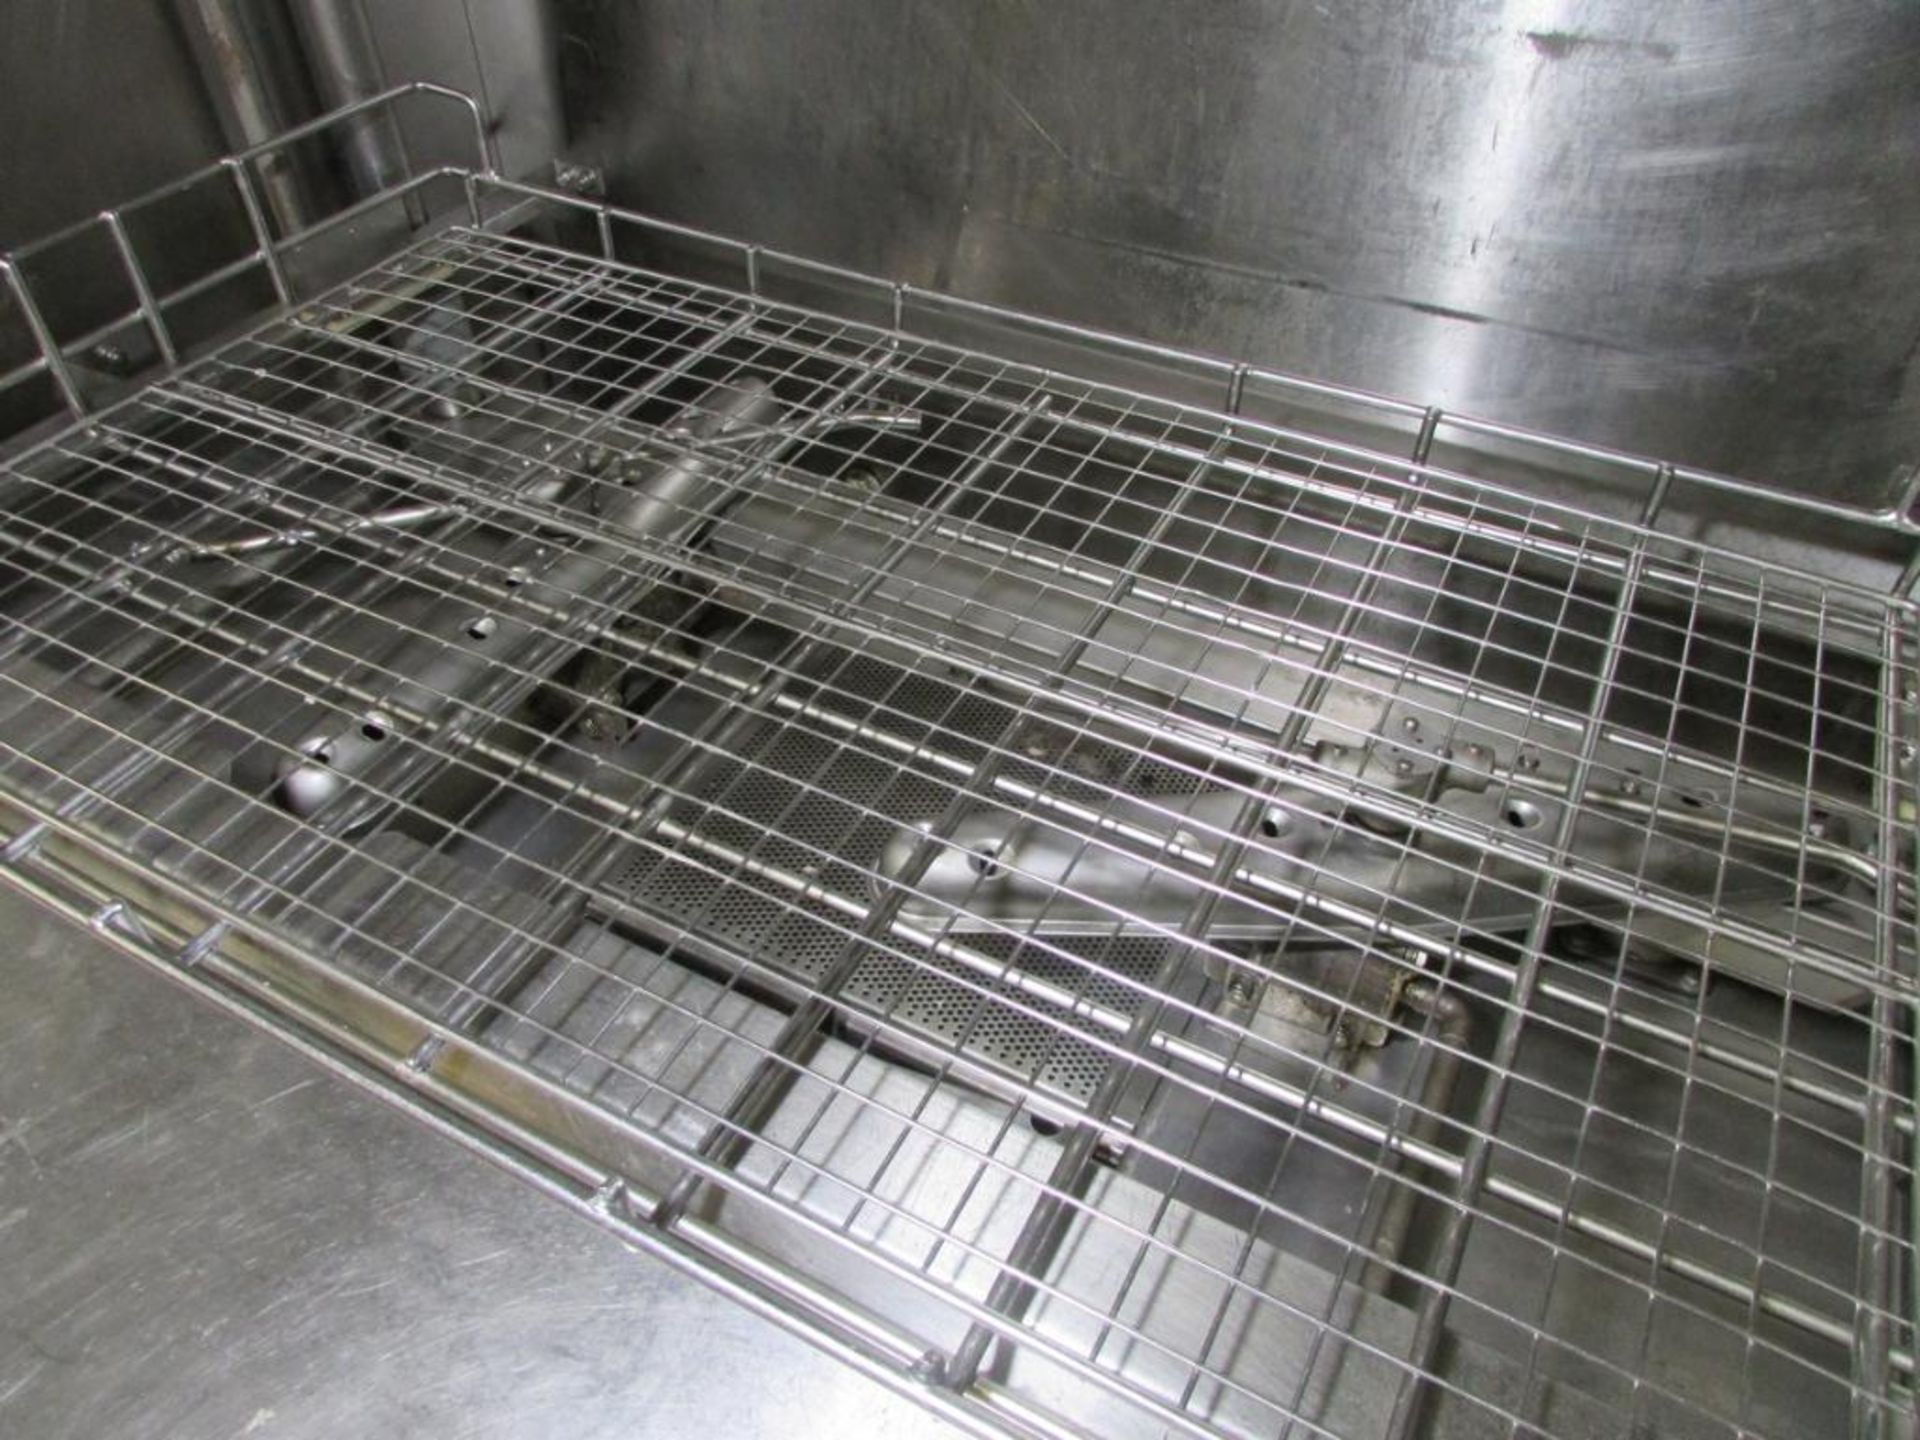 Hobart UW50 Commercial Dishwasher. Wash and Rinse Cycles. 40"x24" Wash Tray, Approx 40"x24"x24" Wash - Image 5 of 11